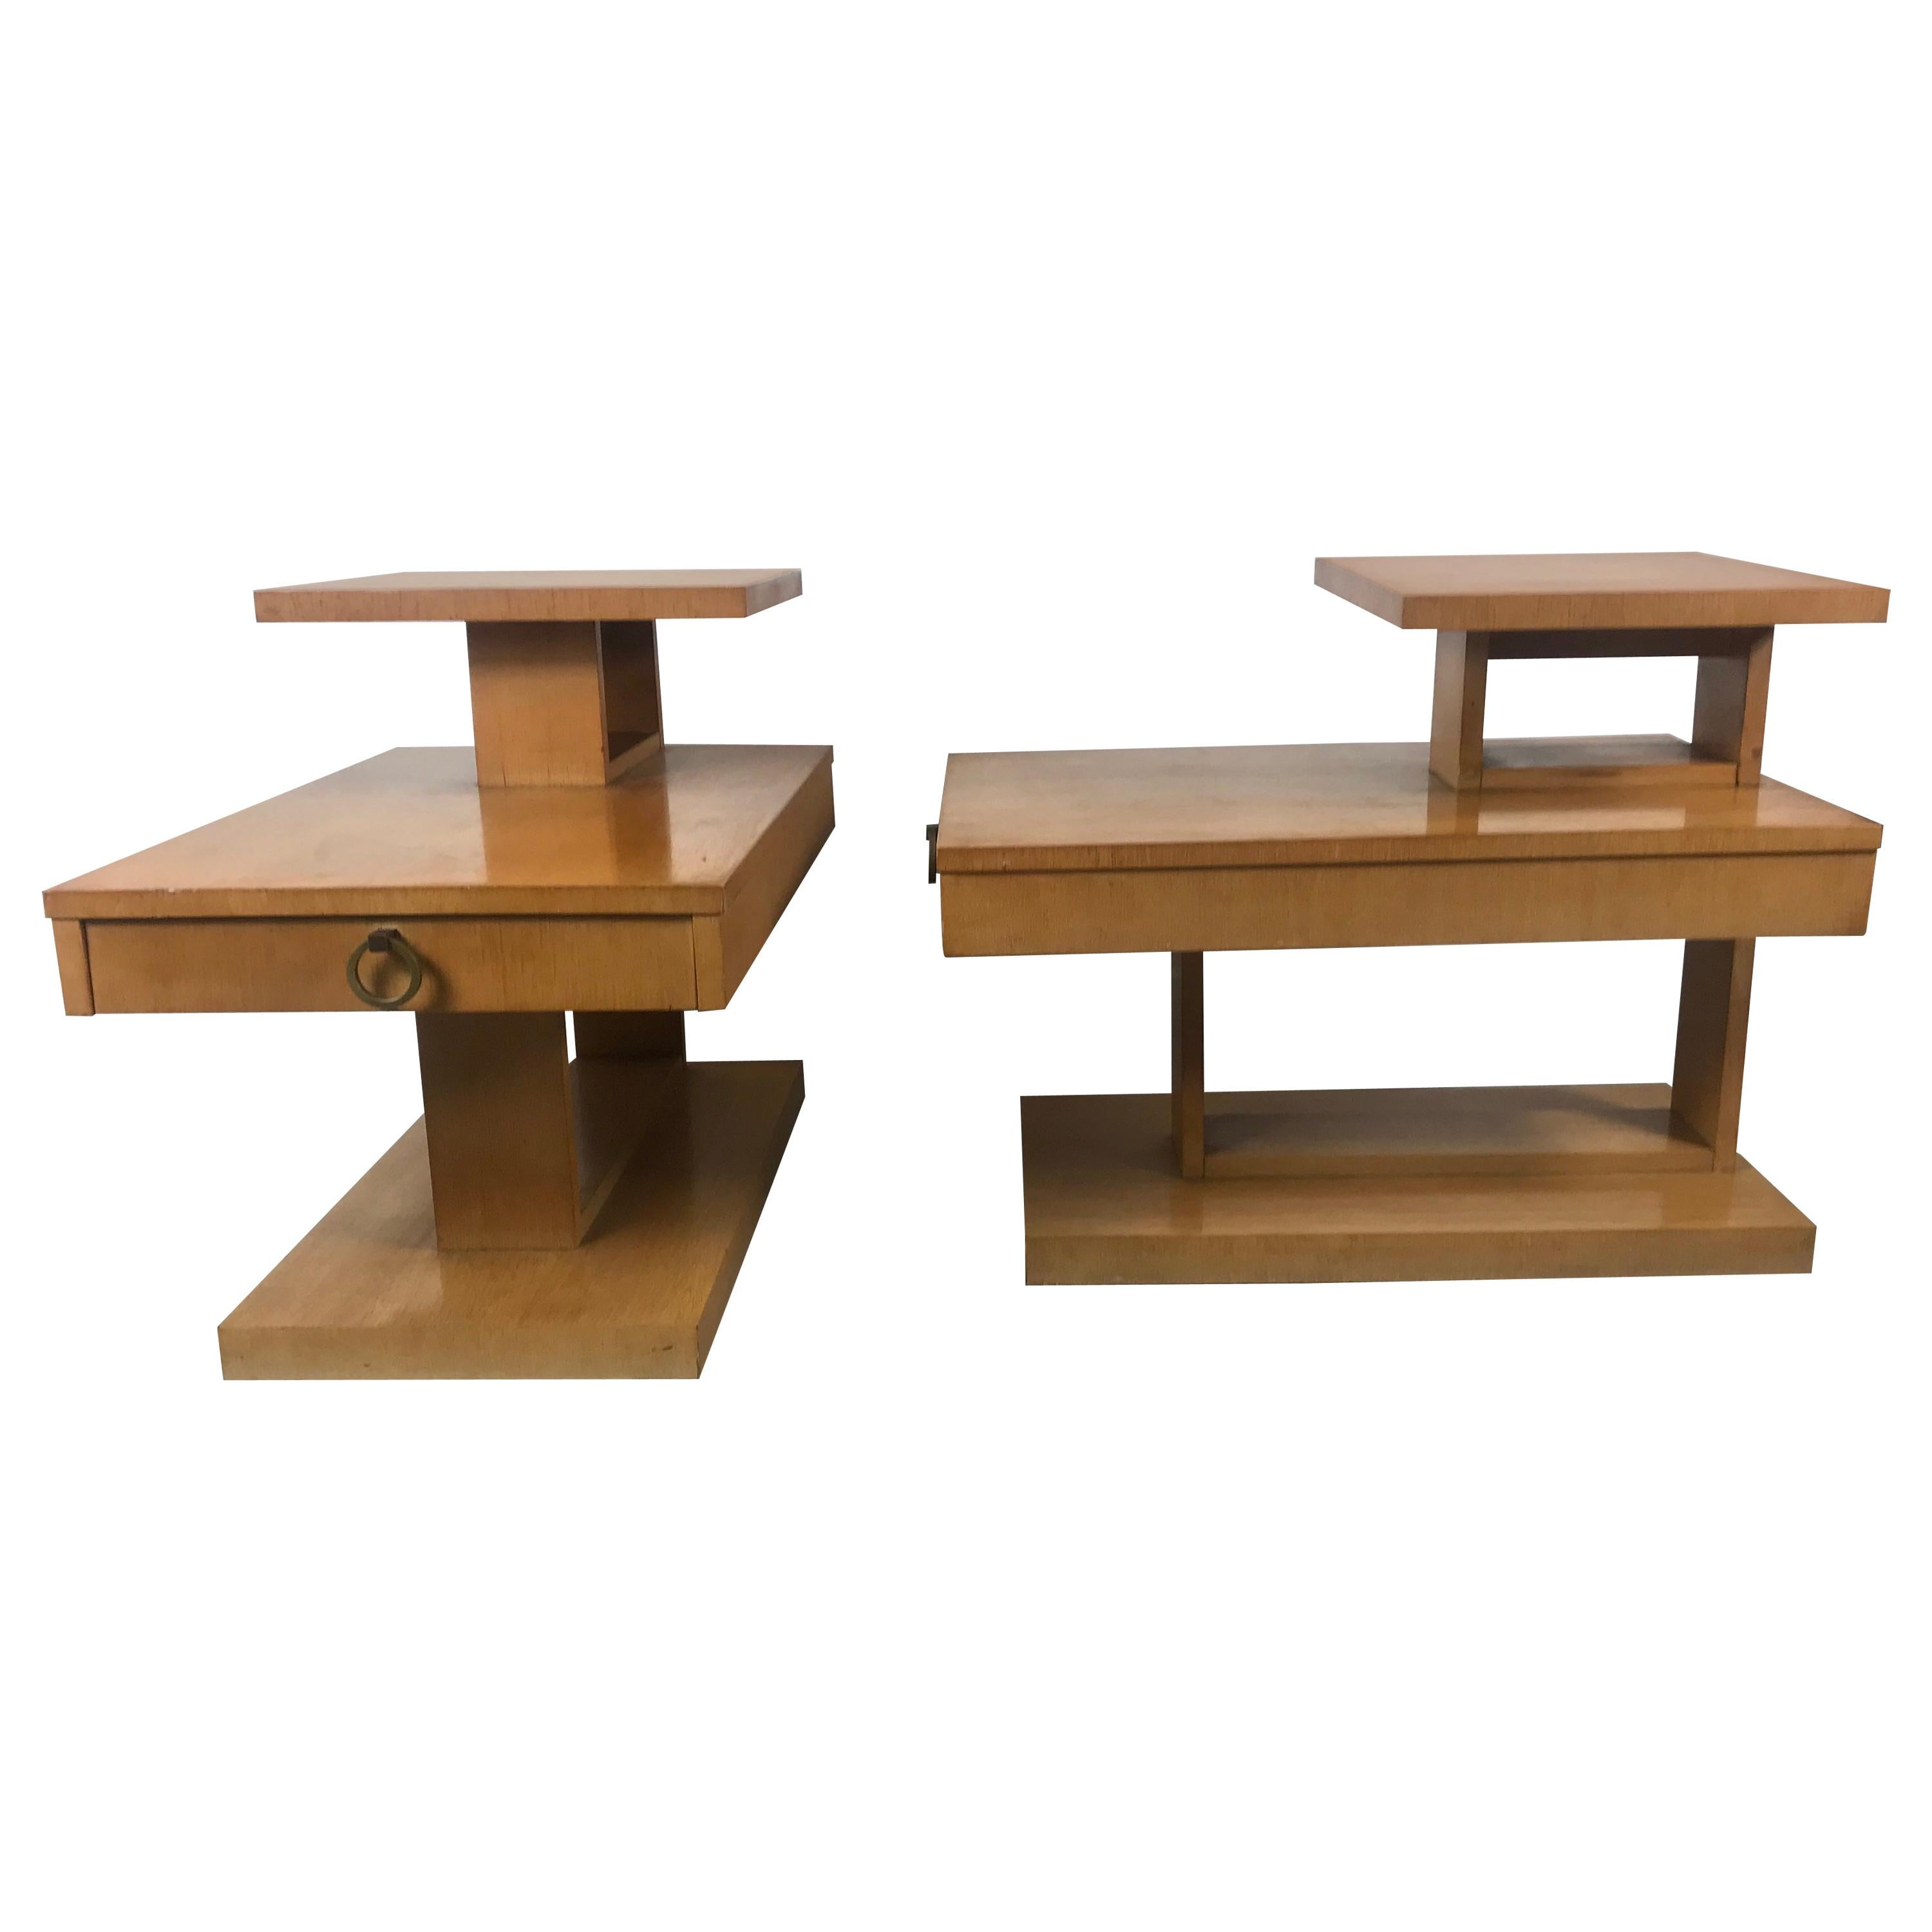 Classic Architectural Mid-Century Modern Step End Tables with Drawers by Lane